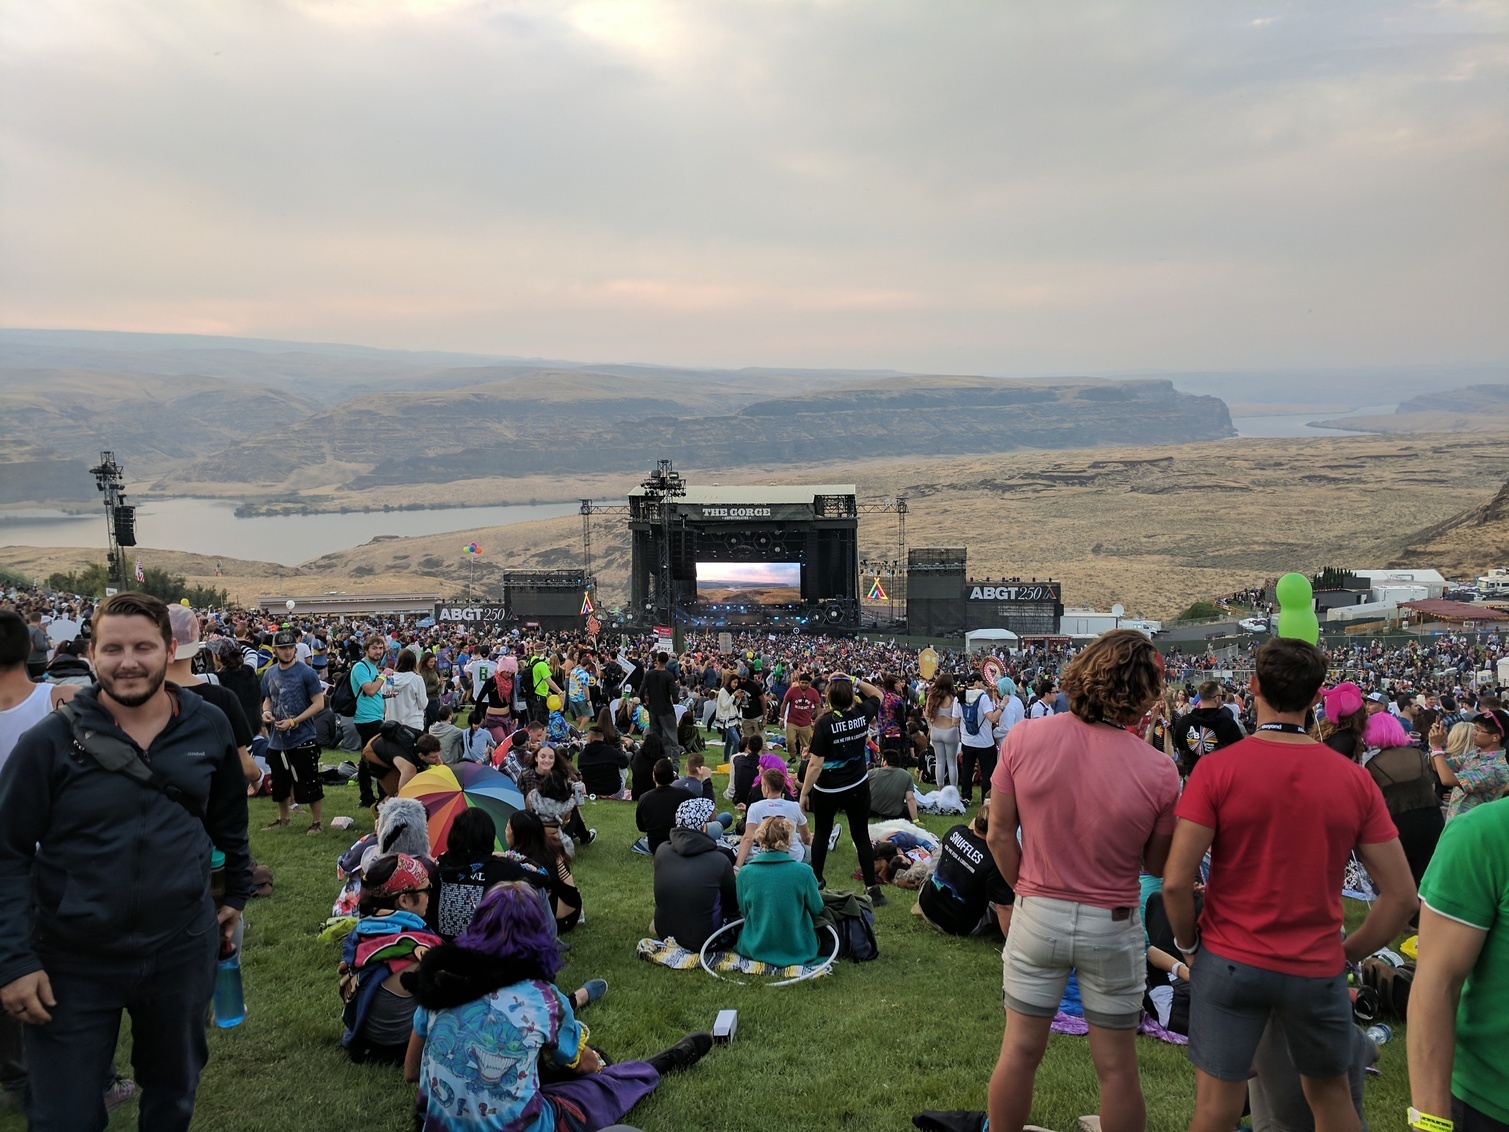 The Gorge Amphitheatre for ABGT250